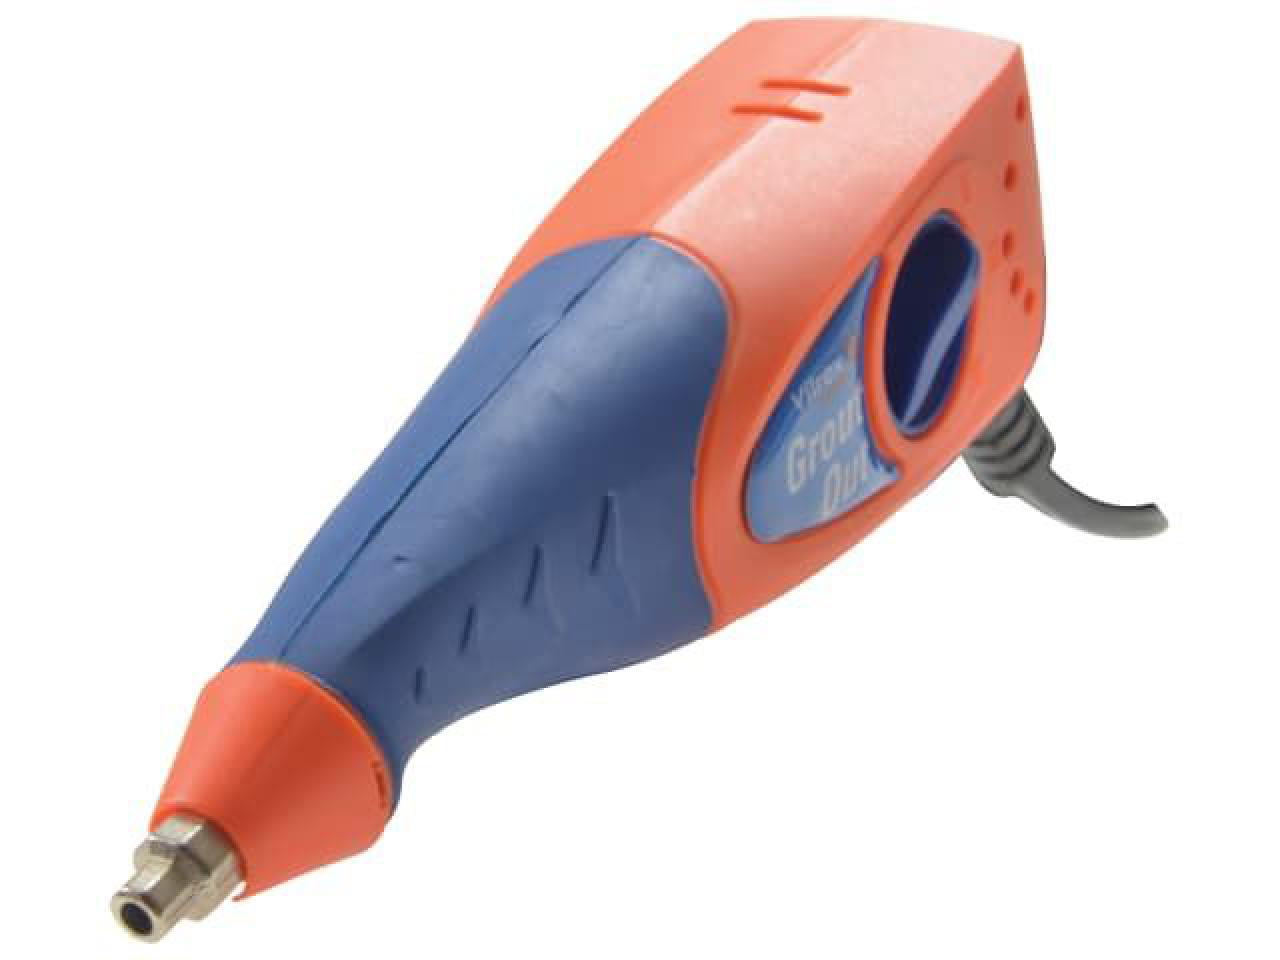 Pacesetter Electric Grout Removal Tool